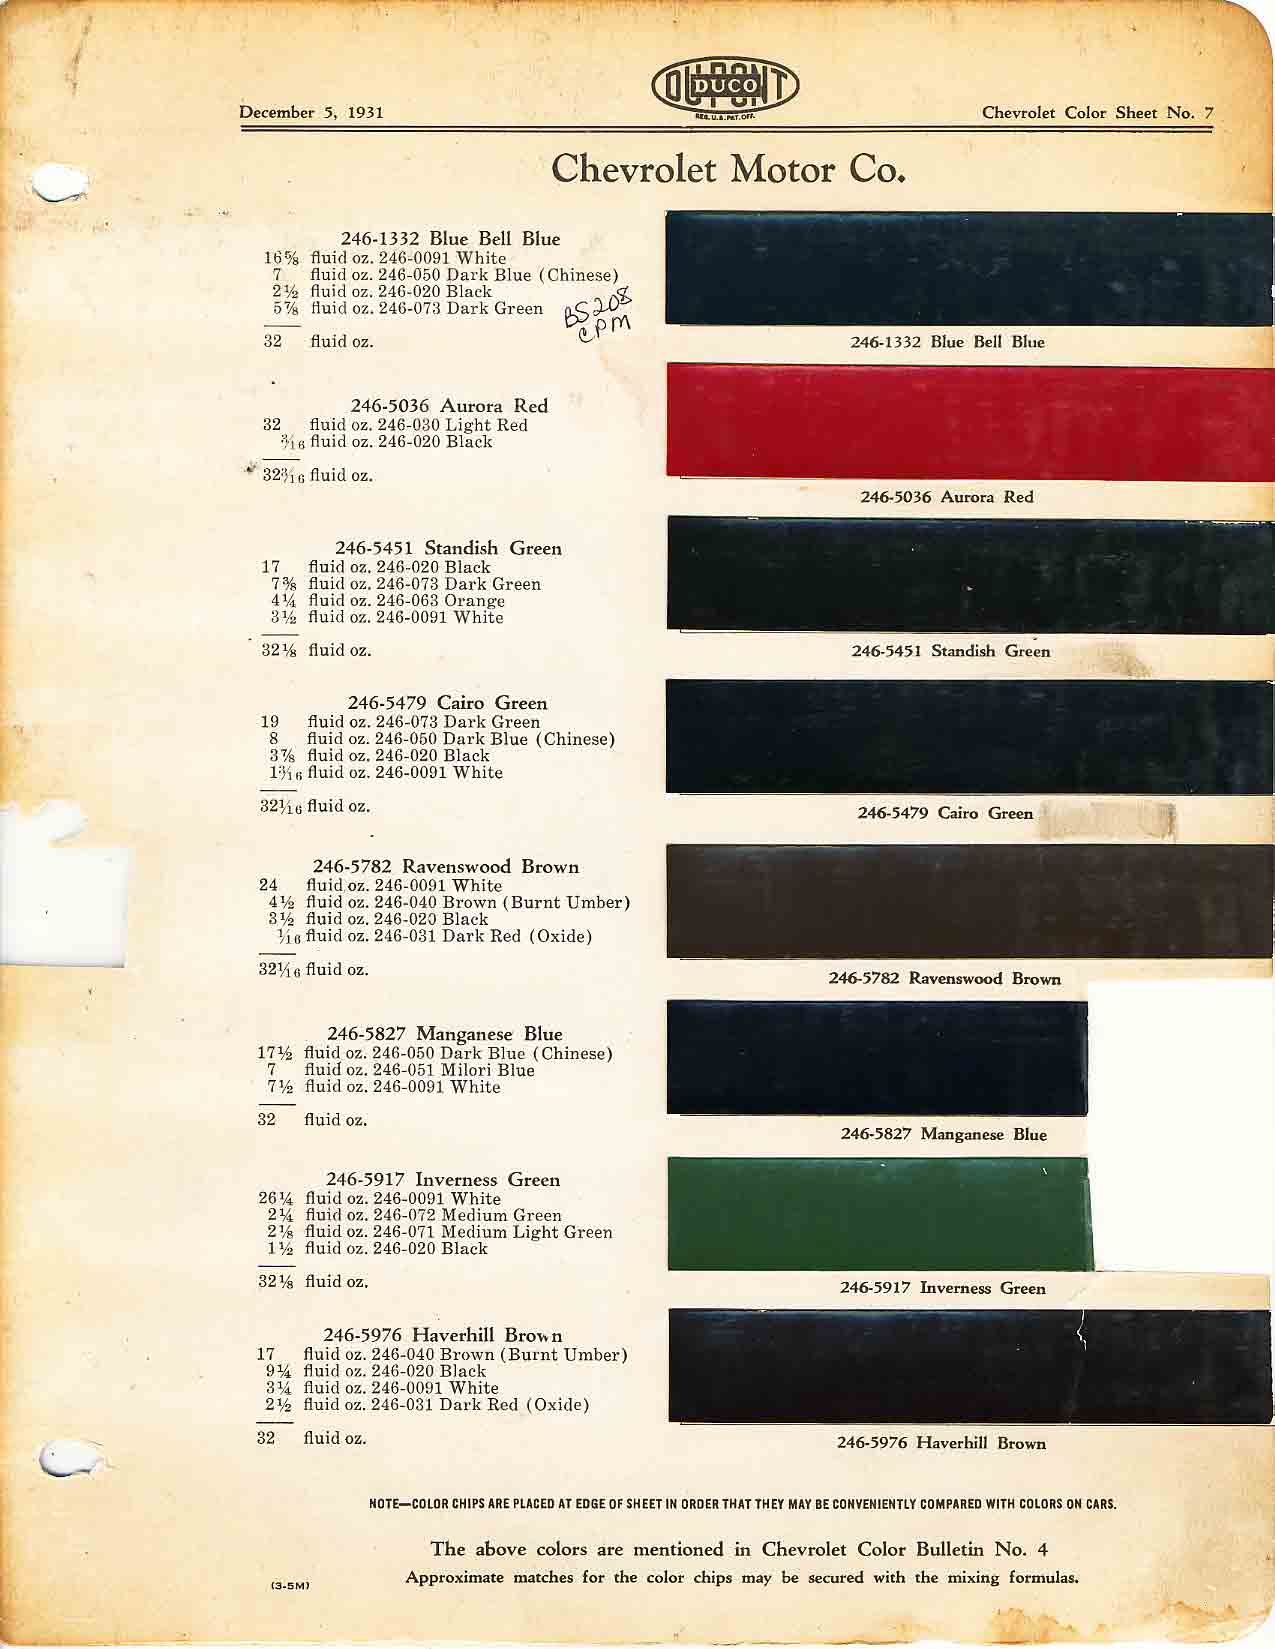 Colors and codes used on Chevrolet Vehicles in 1931